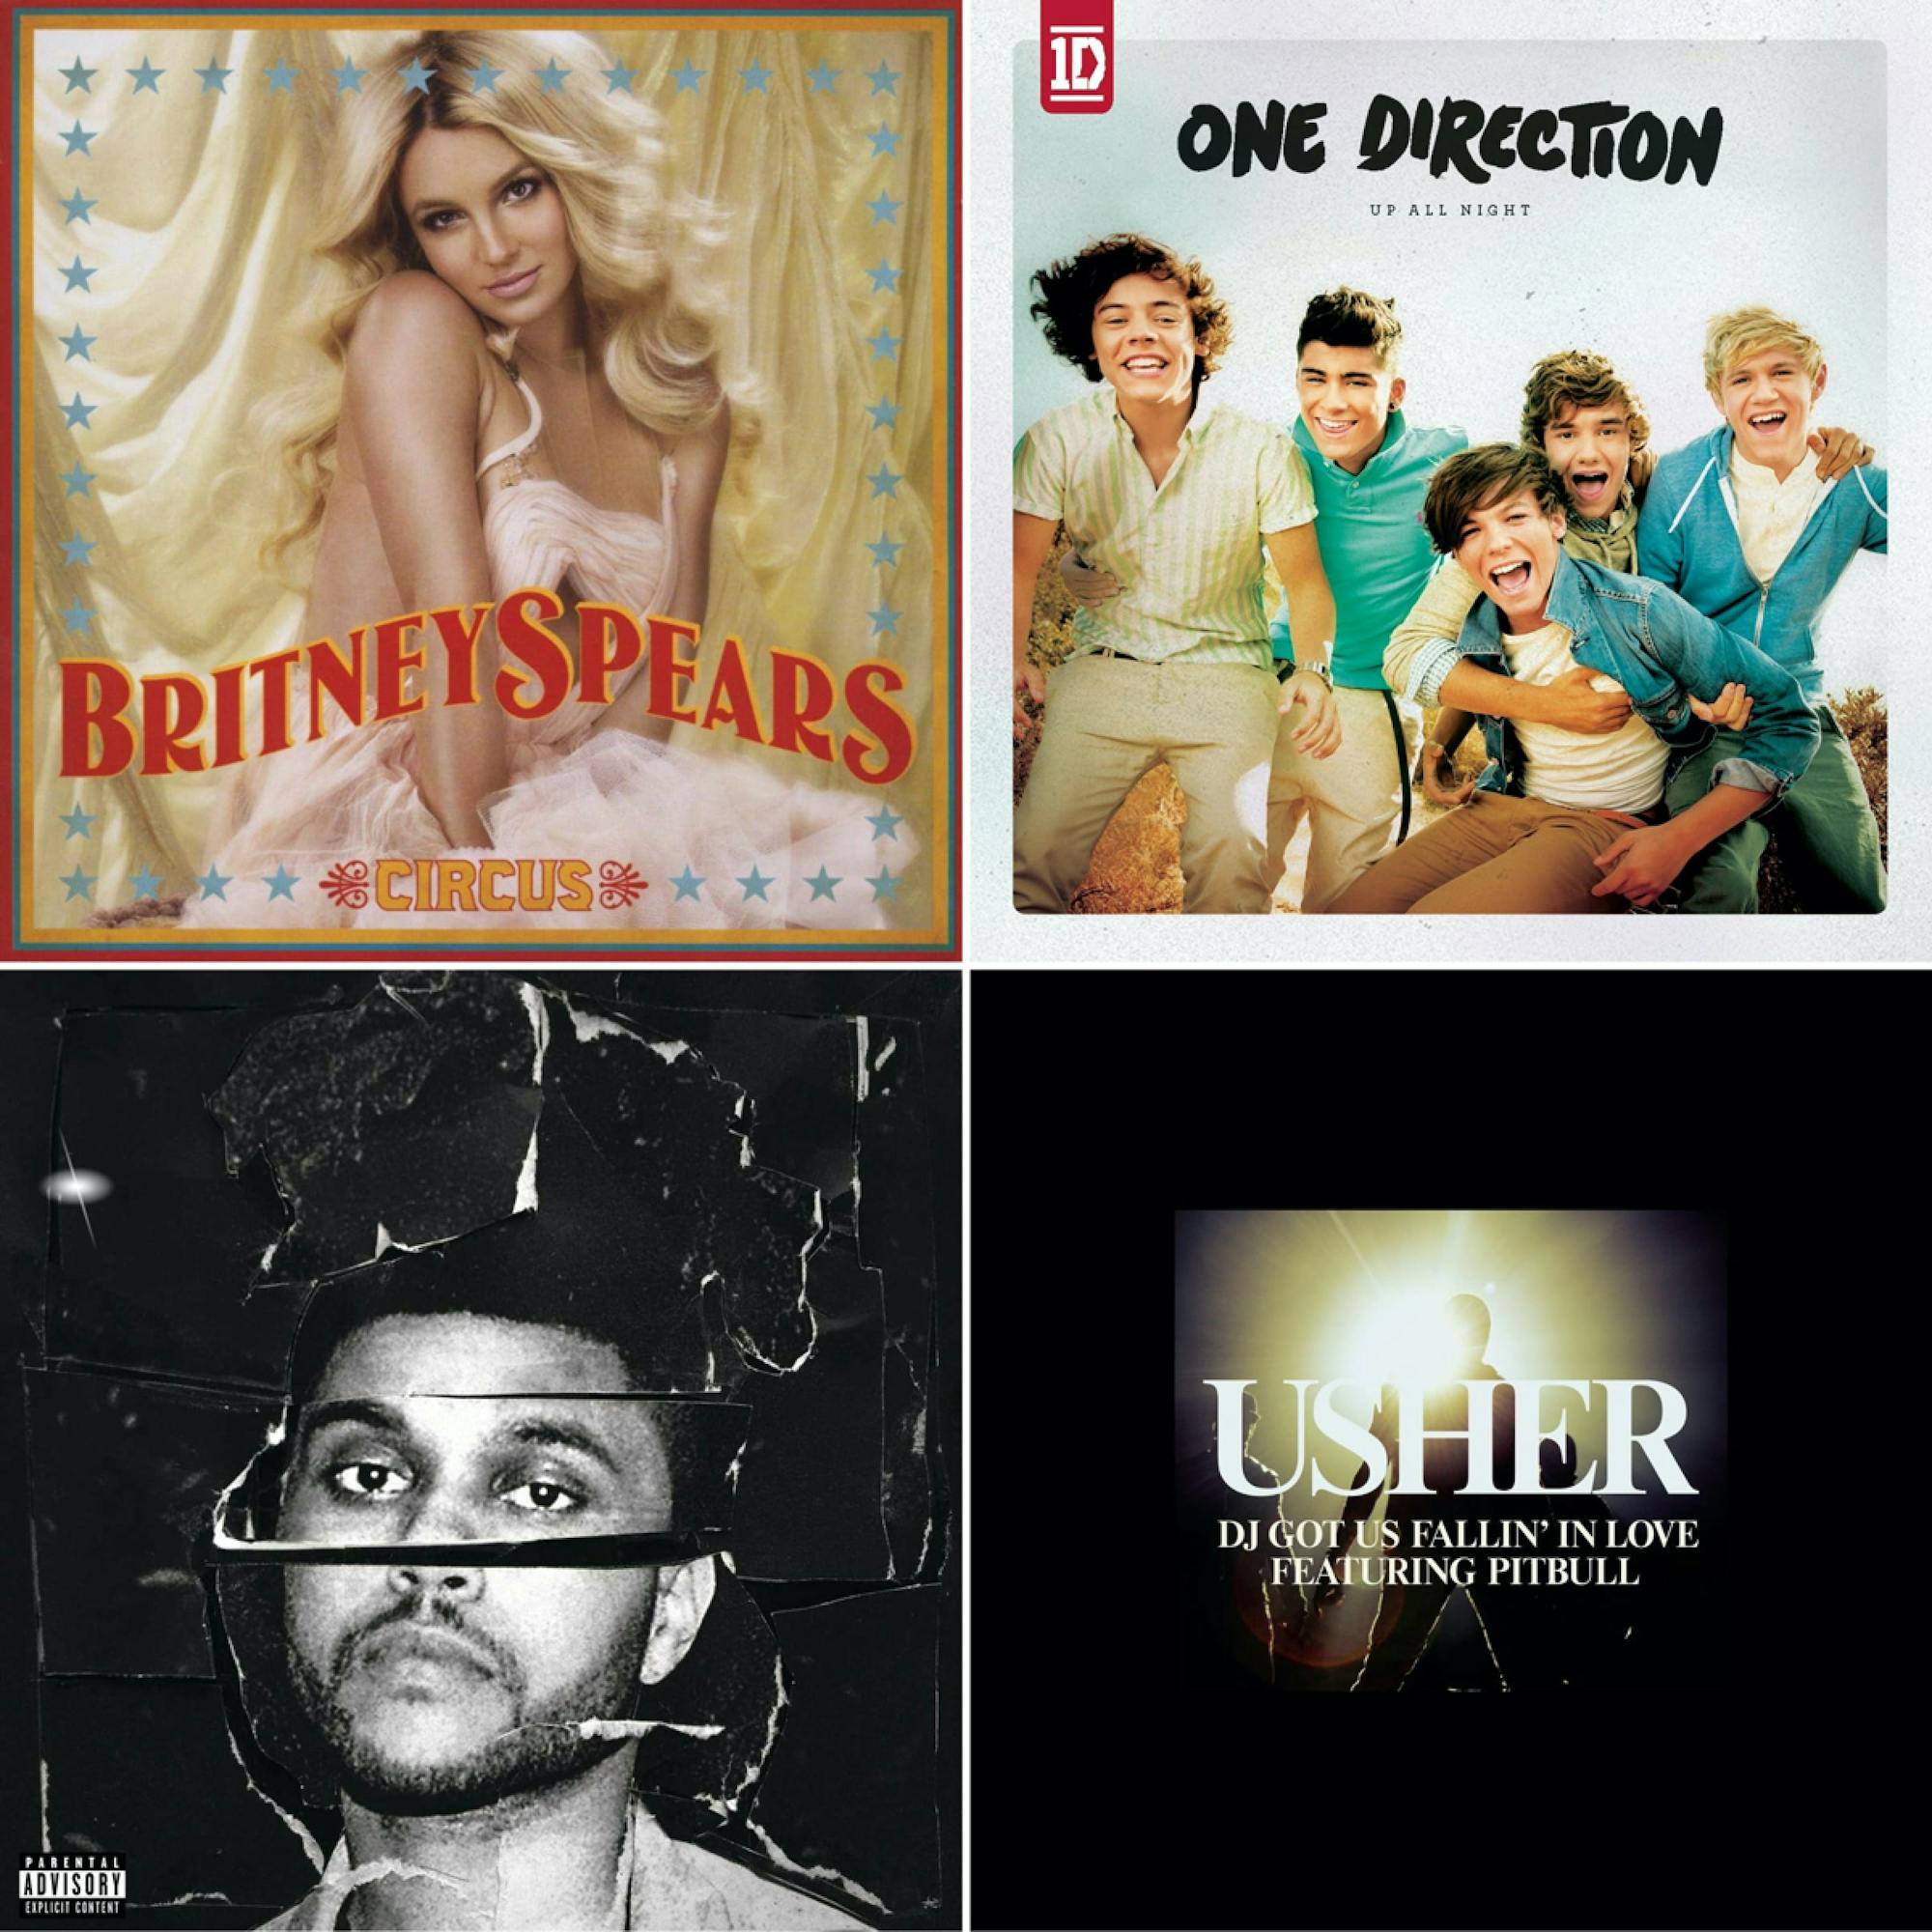 From top left to bottom right: Album or single covers for Circus by Britney Spears, Up All Night by One Direction, Beauty Behind the Madness by The Weeknd, and “DJ Got Us Fallin’ In Love” Featuring Pitbull by Usher. 